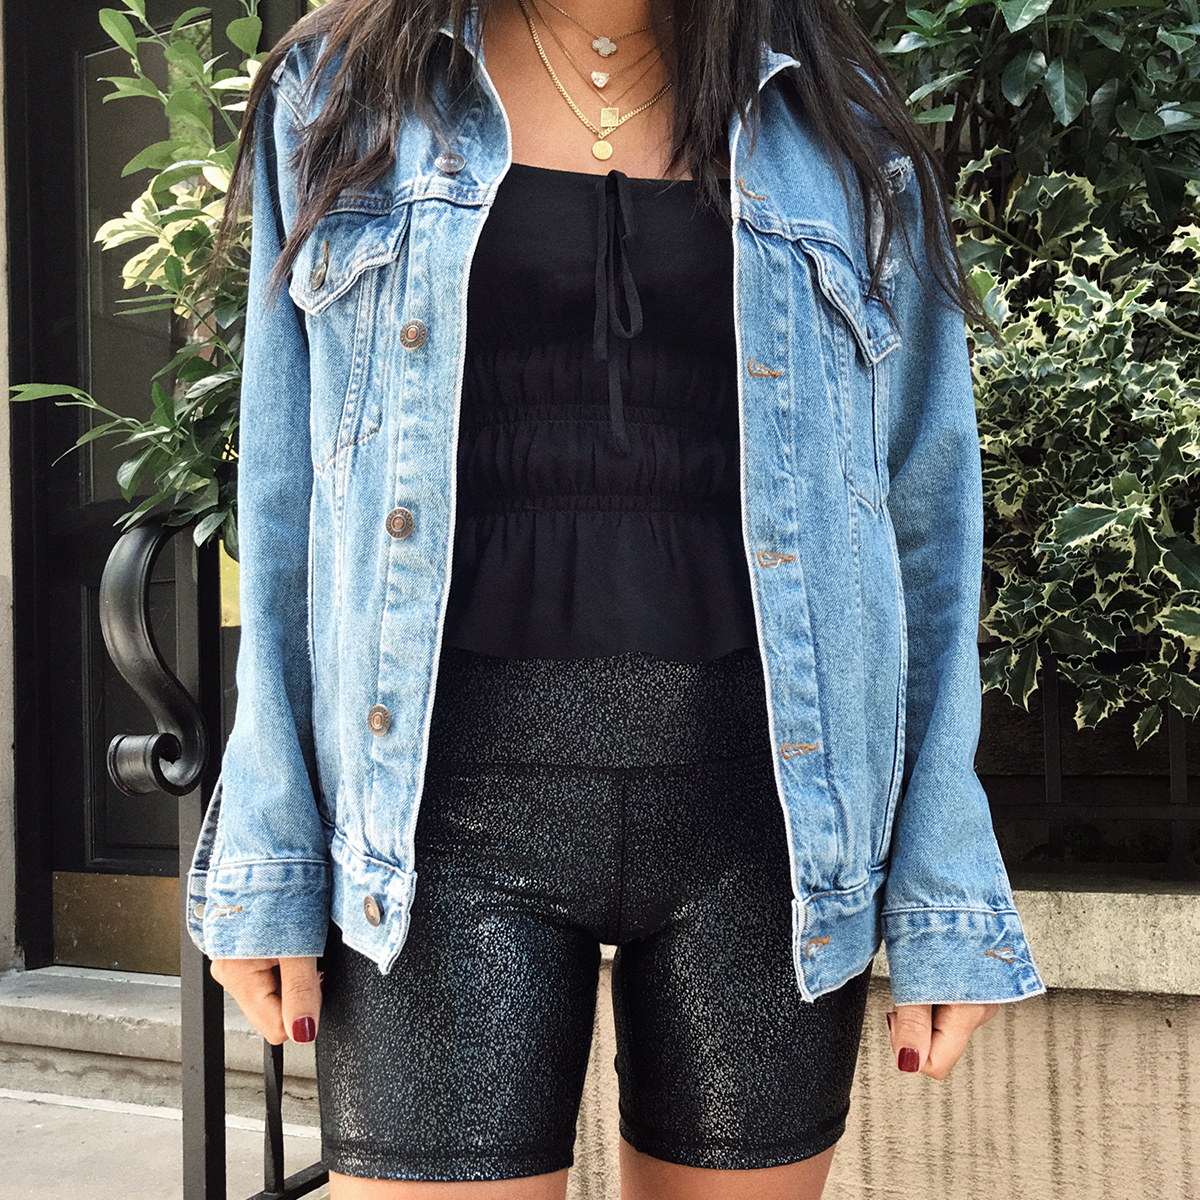 6 Girls in NYC and L.A. Teach You How to Wear Bike Shorts